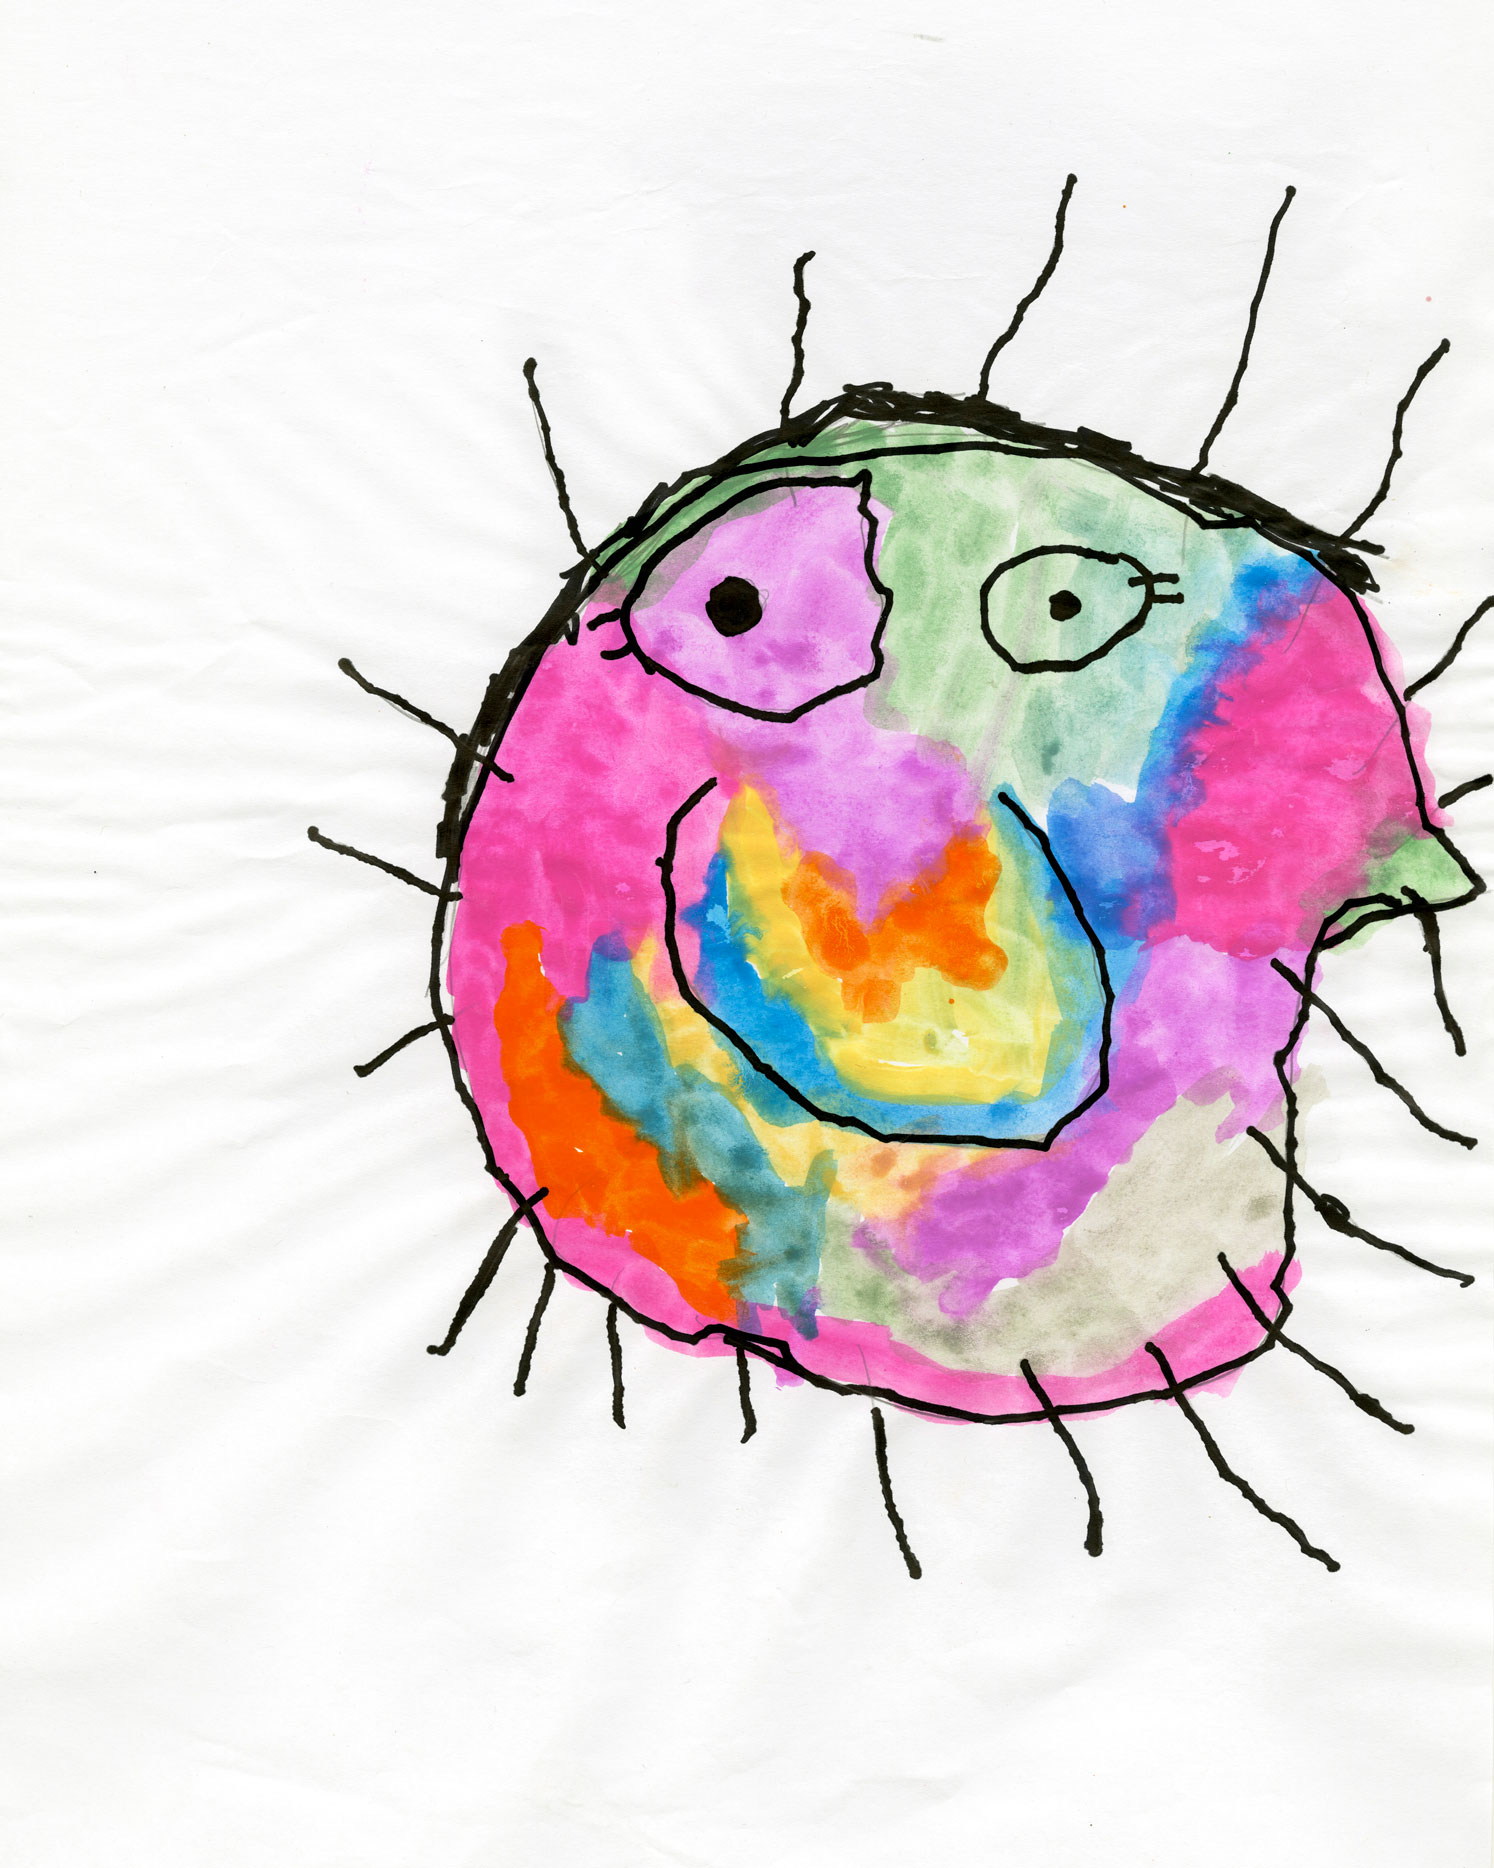 Joey, age 4, A rainbow germ called Rosemary. Courtesy the artist and Gallery of Children’s Art (GoCA).